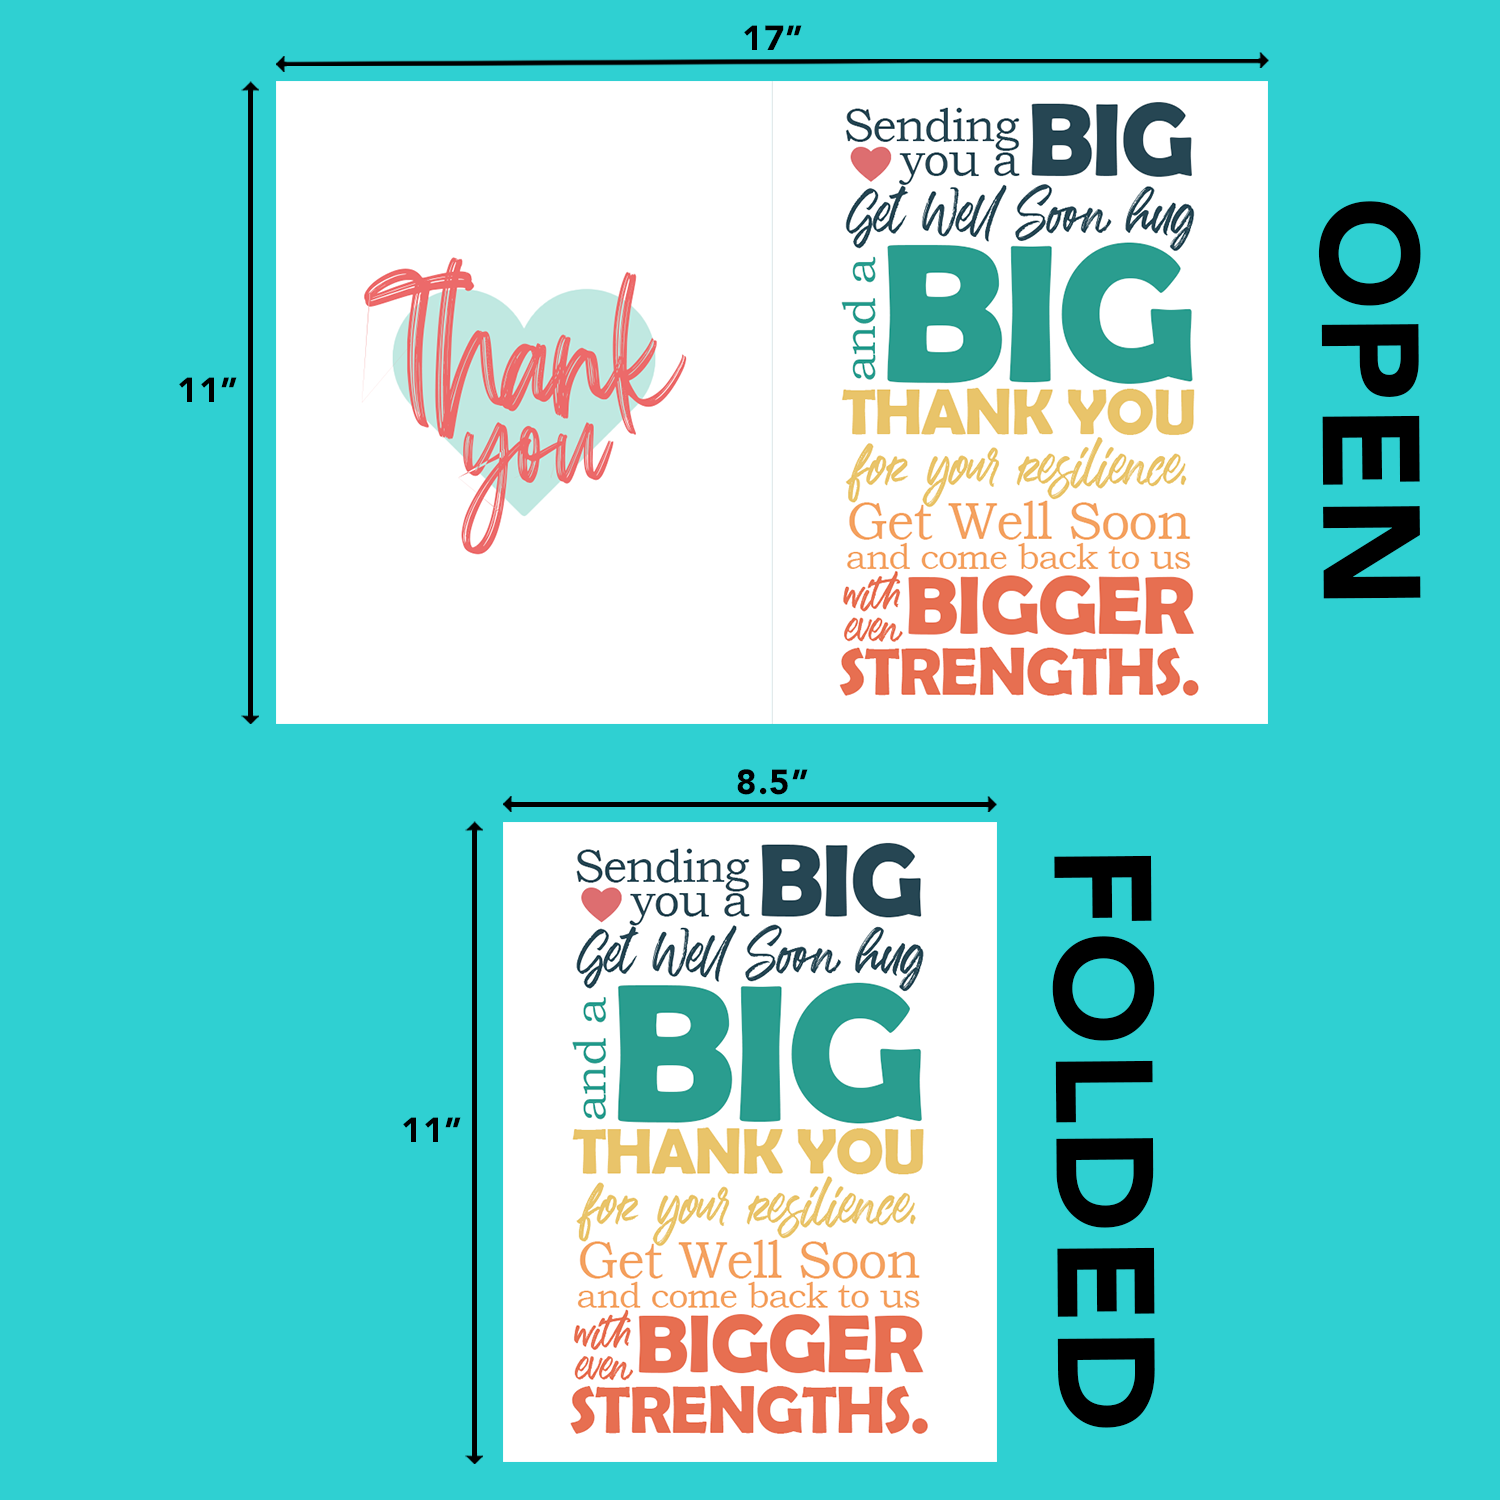 A Big Get Well Soon Greeting Cards with Envelopes – 8.5" x 11" Jumbo Size Thank You Cards for Large Groups and Teams  – 2 per Pack